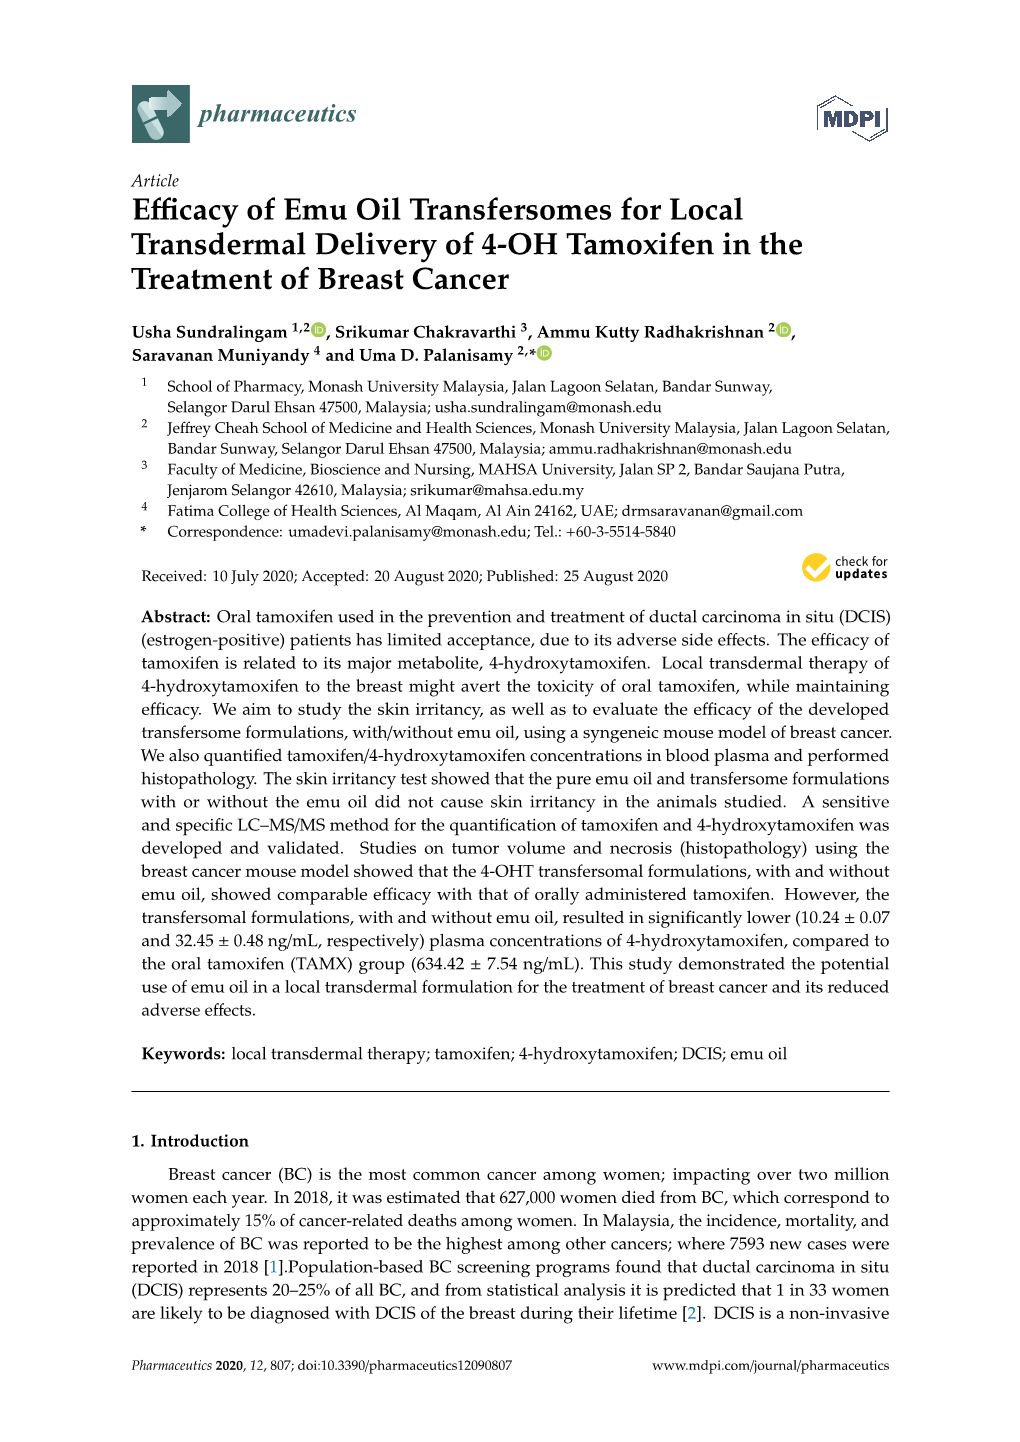 Efficacy of Emu Oil Transfersomes for Local Transdermal Delivery